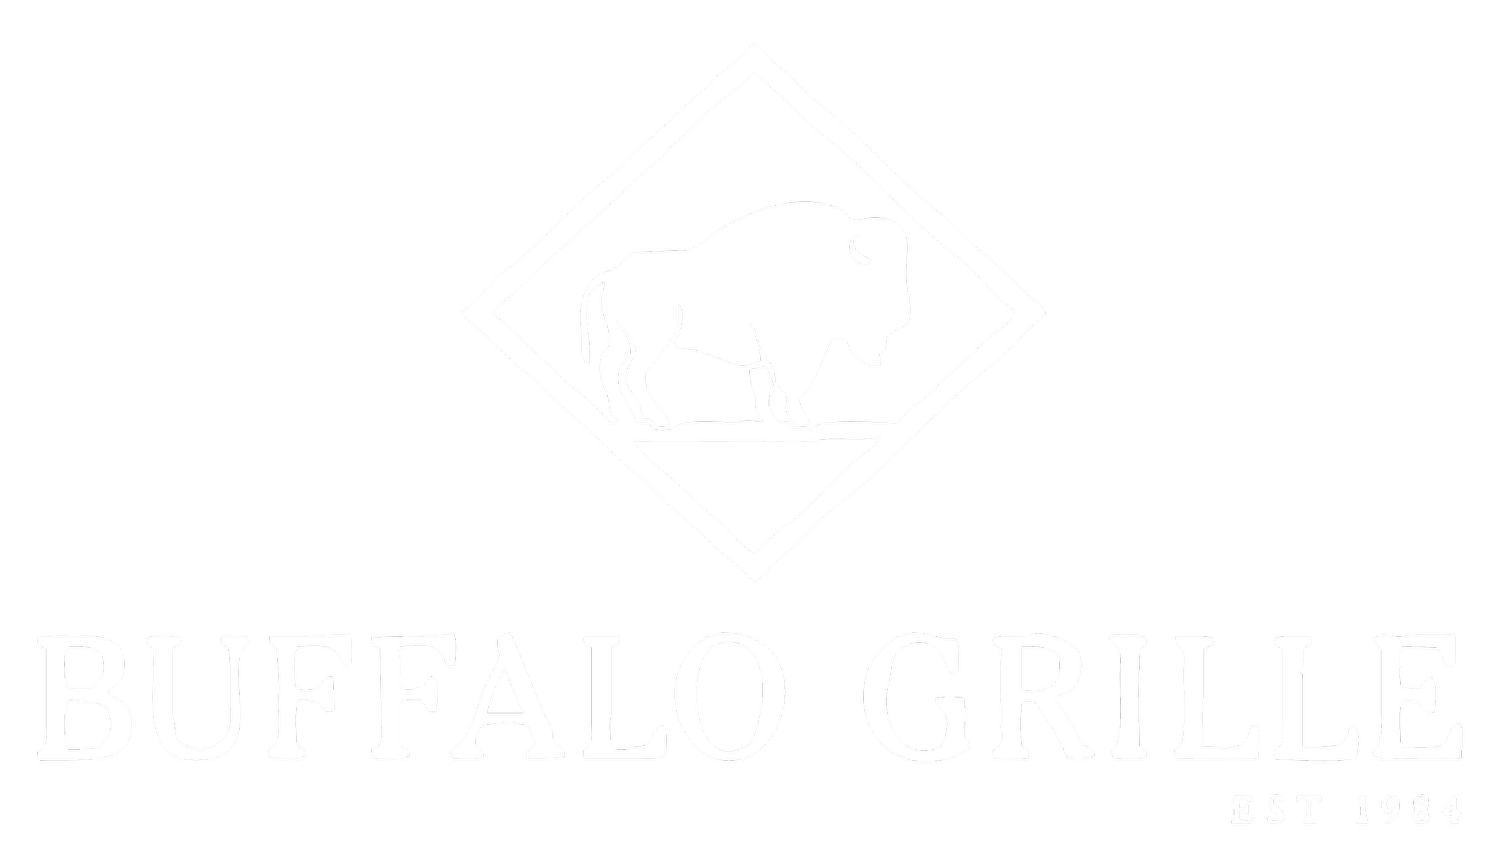 The Buffalo Grille